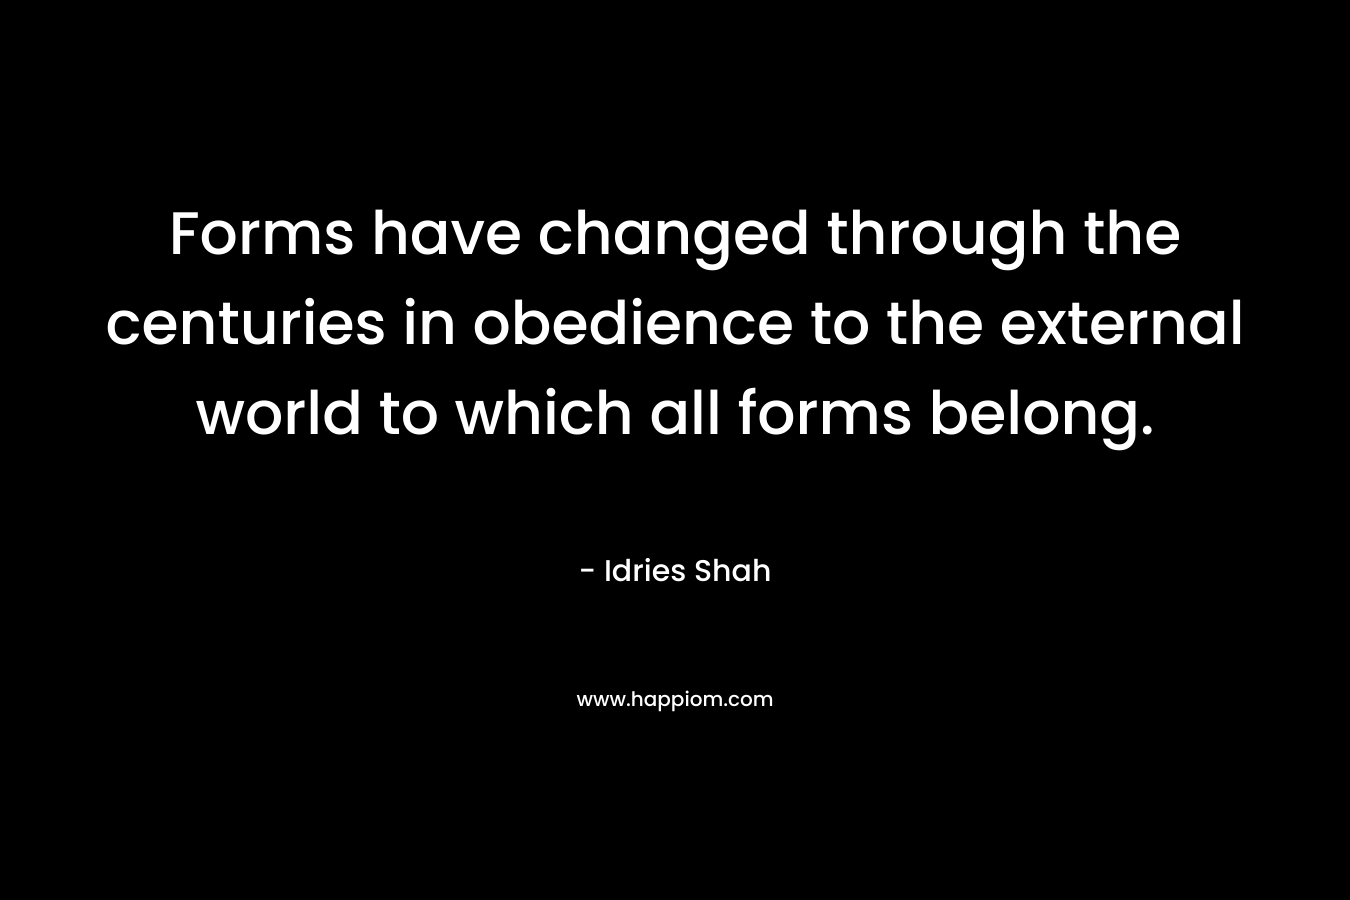 Forms have changed through the centuries in obedience to the external world to which all forms belong.